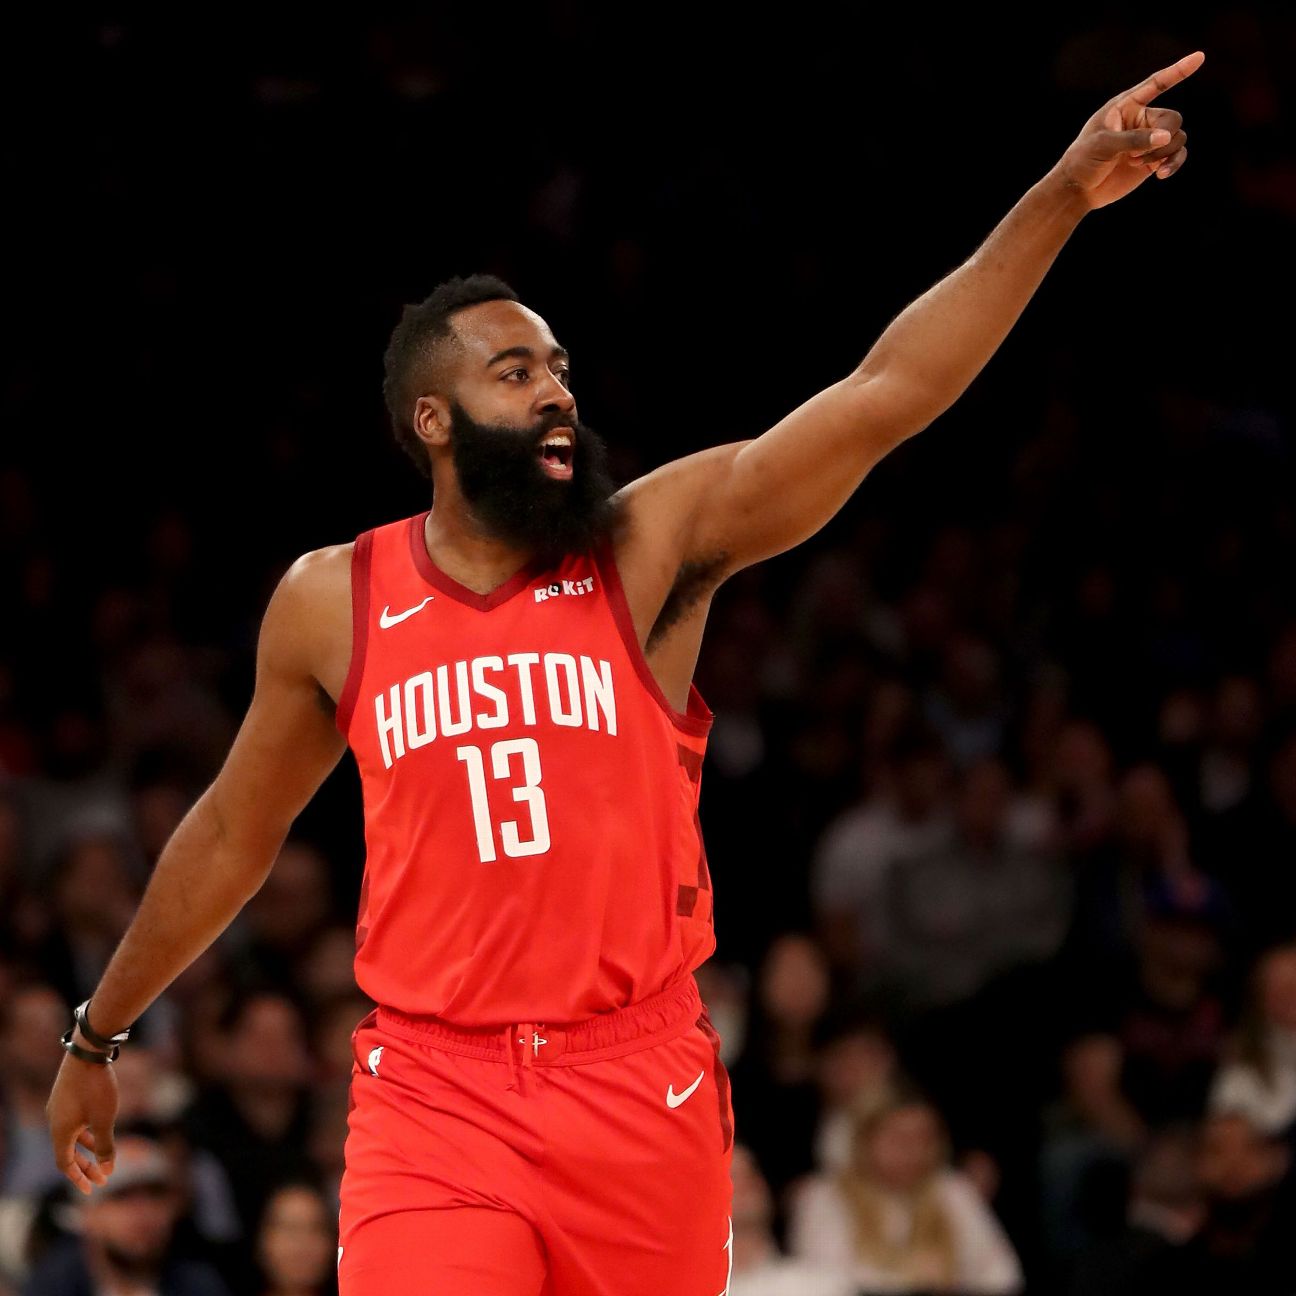 HOUSTON (AP) — James Harden had 53 points, 17 assists and 16